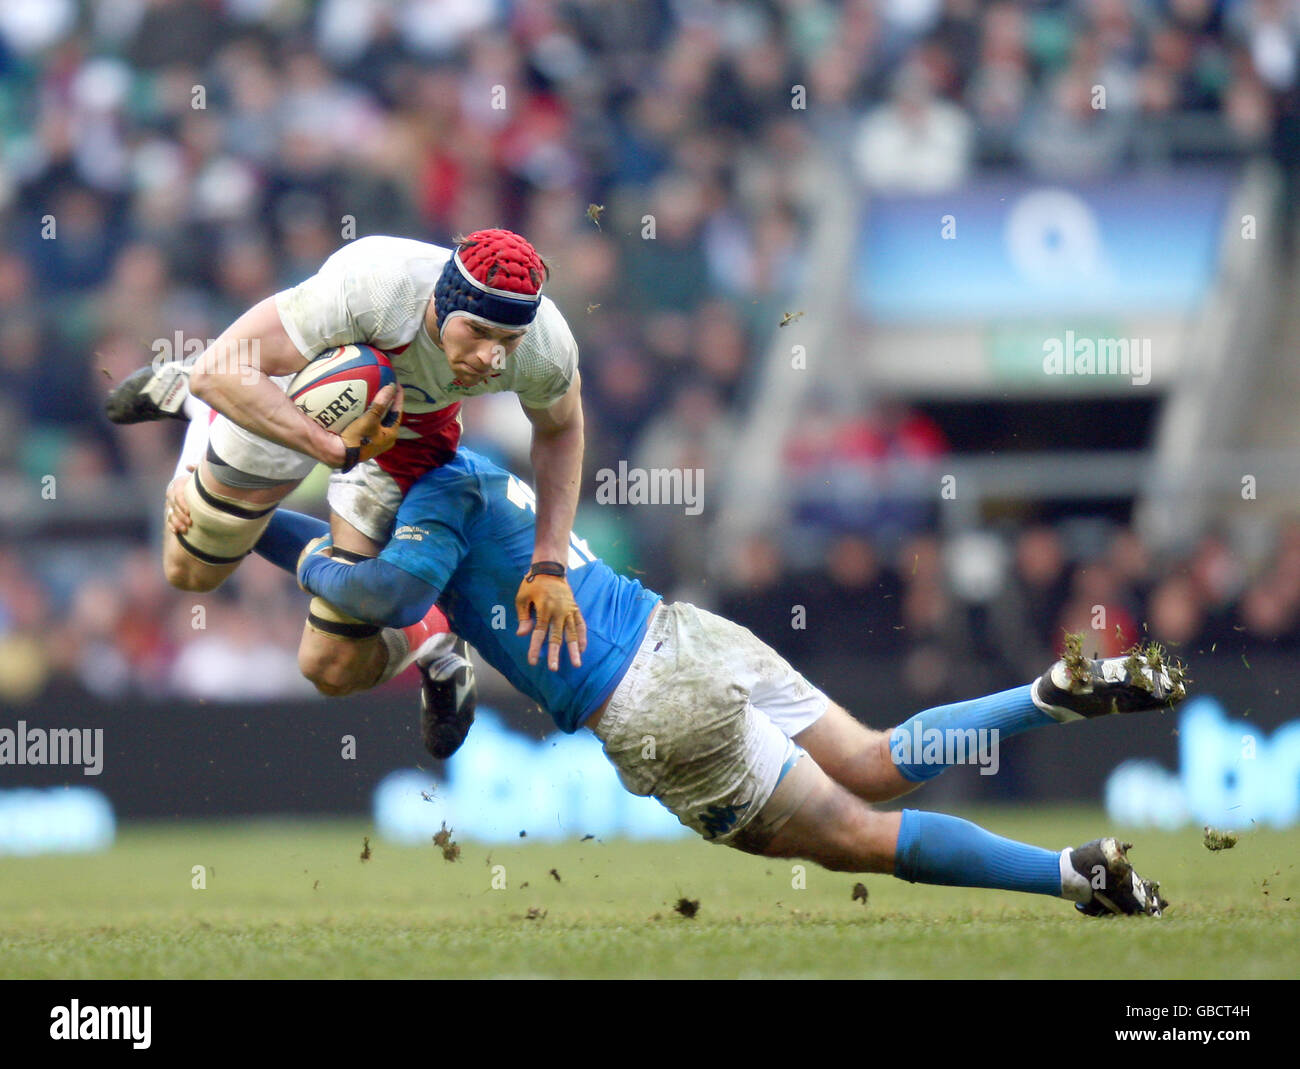 Rugby Union - RBS Six Nations Championship 2009 - England v Italy - Twickenham. England's Nick Kennedy is tackled by Italy's Gonzalo Gaecia during the RBS 6 Nations match at Twickenham, Twickenham. Stock Photo